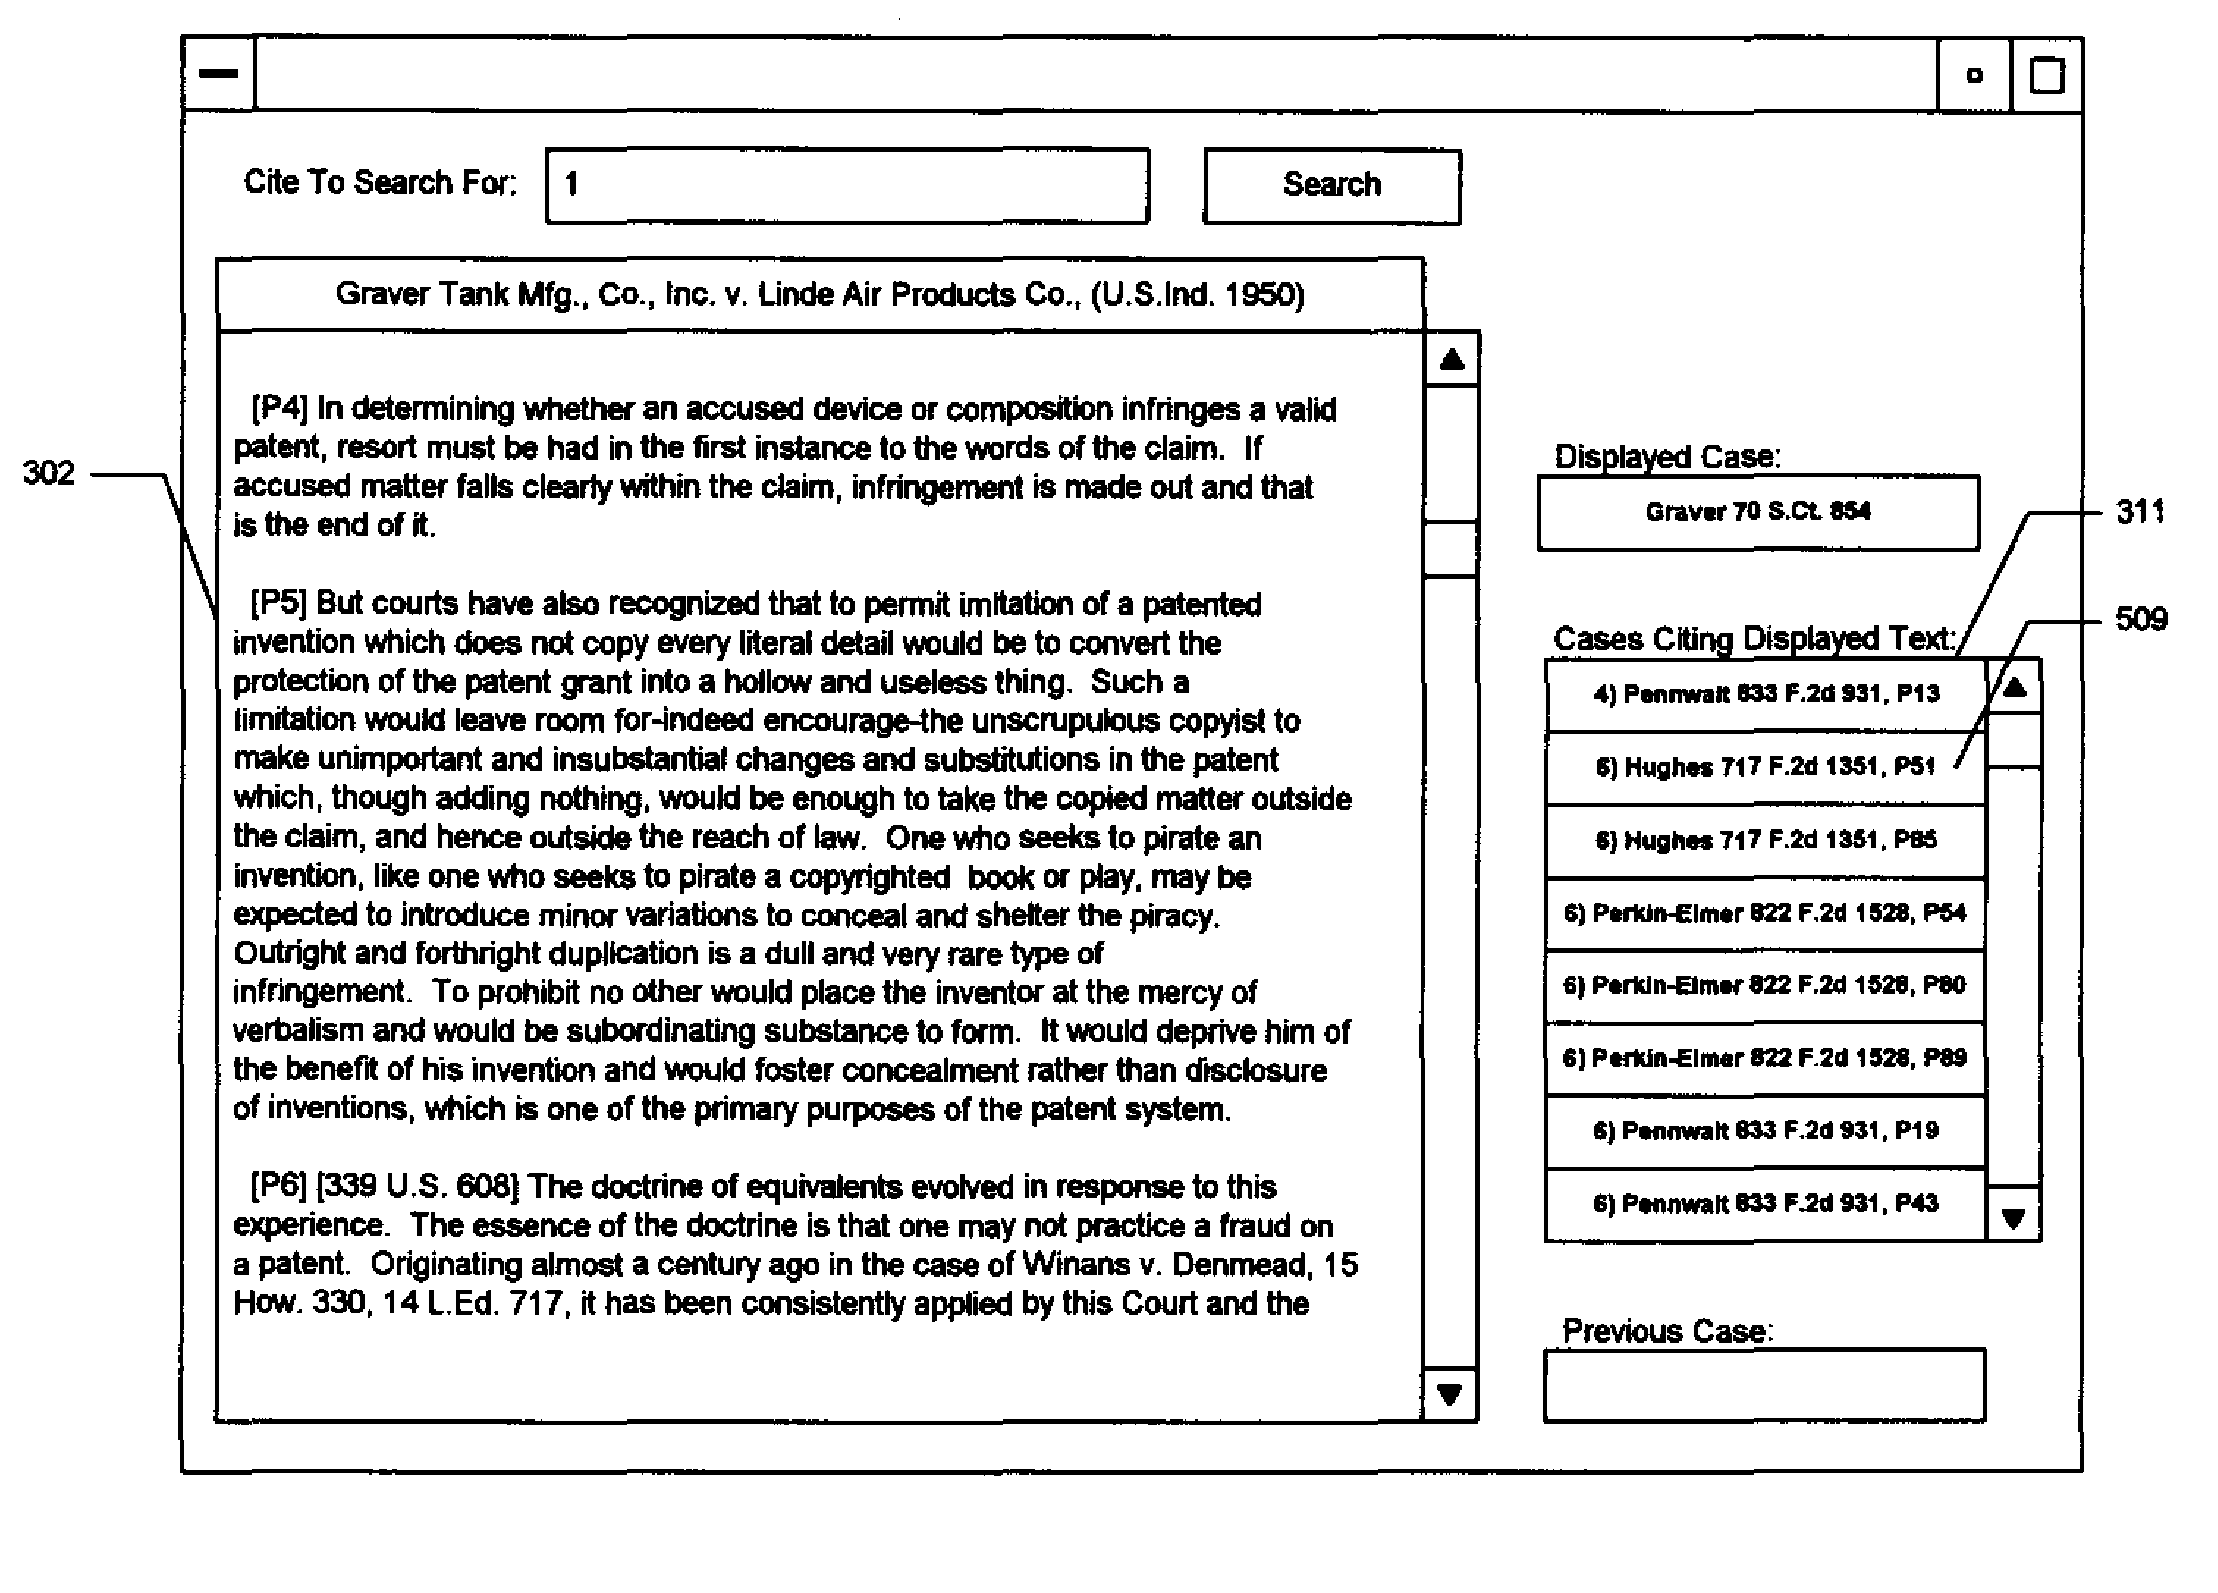 Efficiently displaying and researching information about the interrelationships between documents